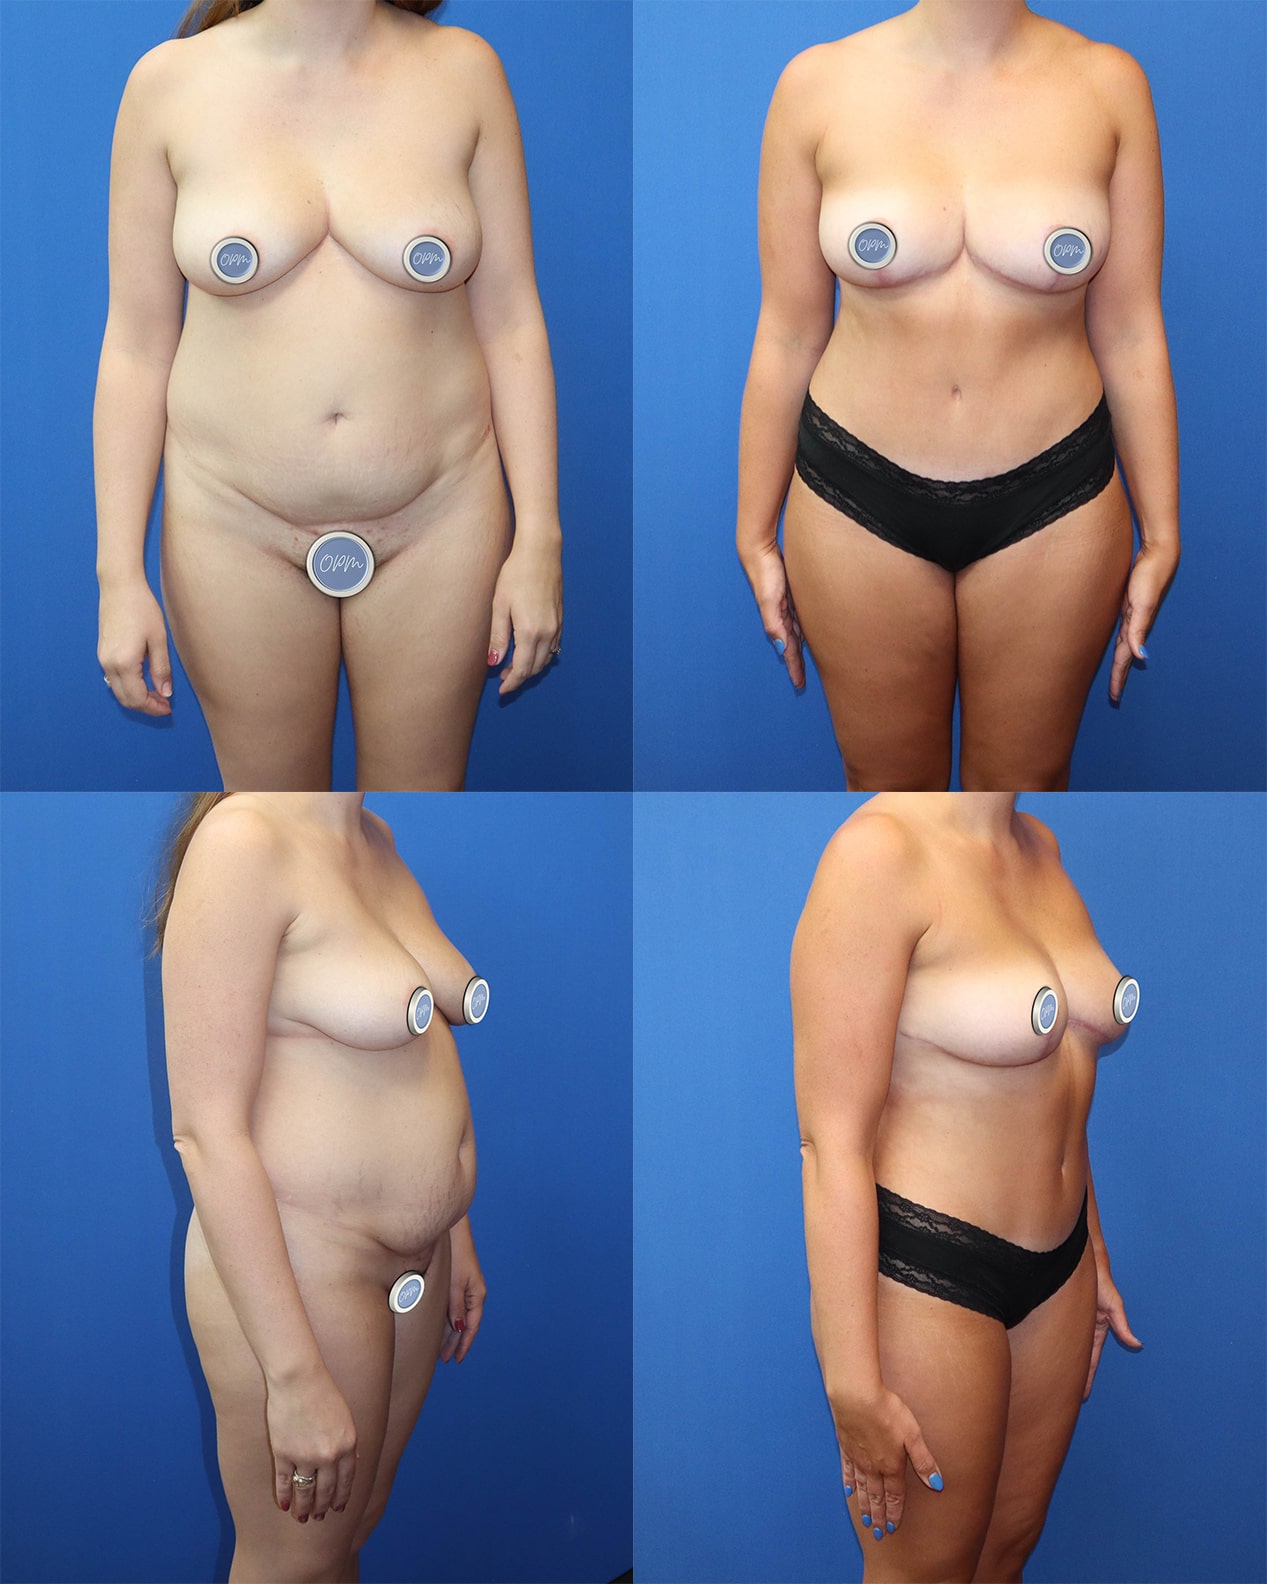 Tummy Tuck Success - Before-and-after images capturing the impressive results of a successful procedure on the client's abdomen.